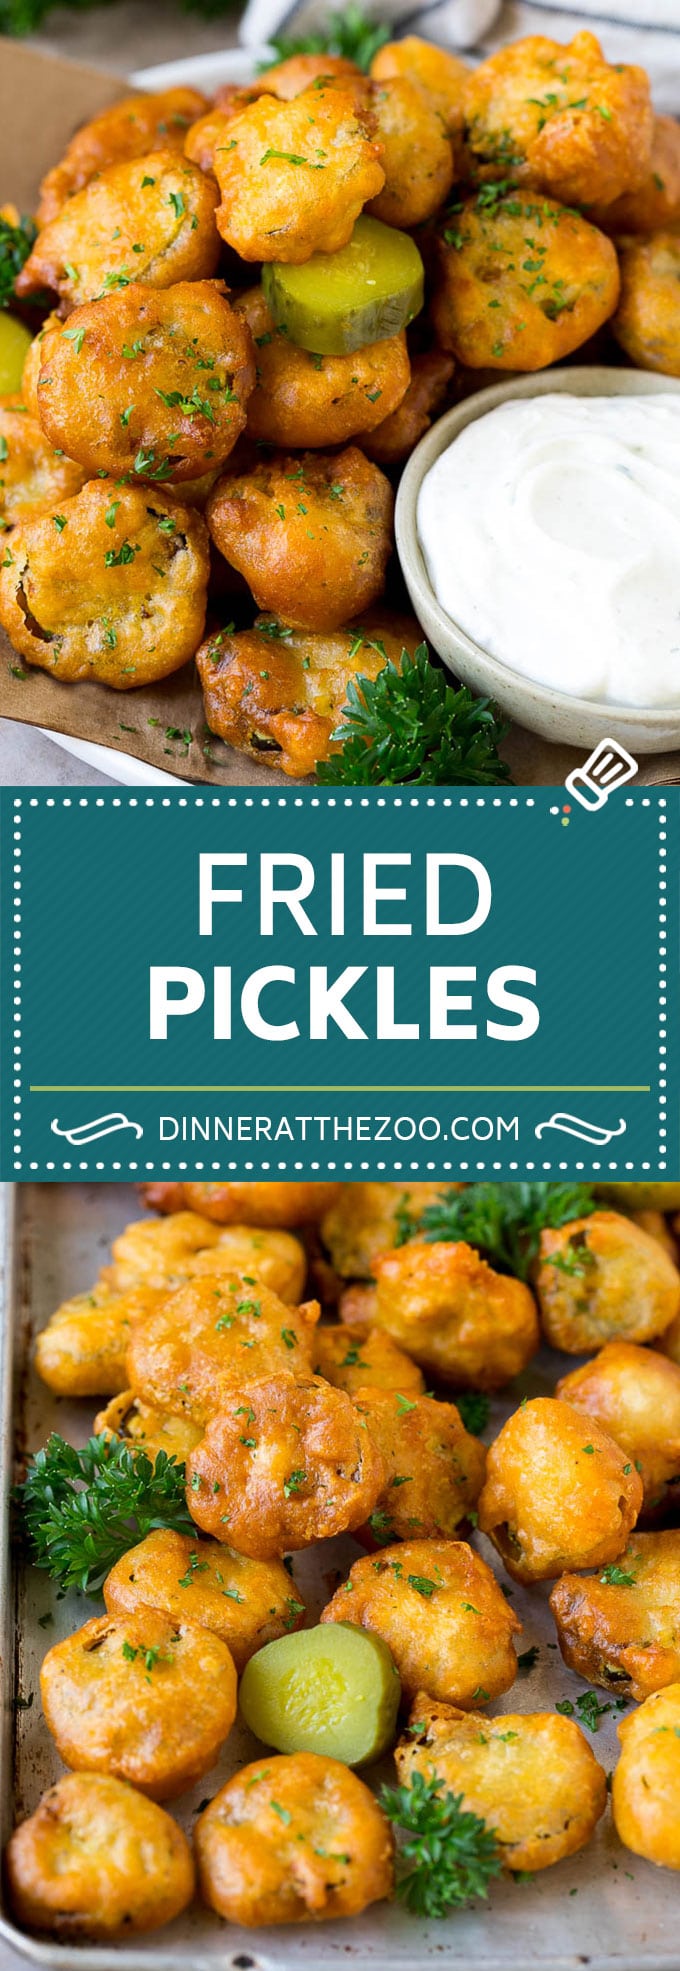 Fried Pickles Recipe #pickles #appetizer #snack #dinneratthezoo